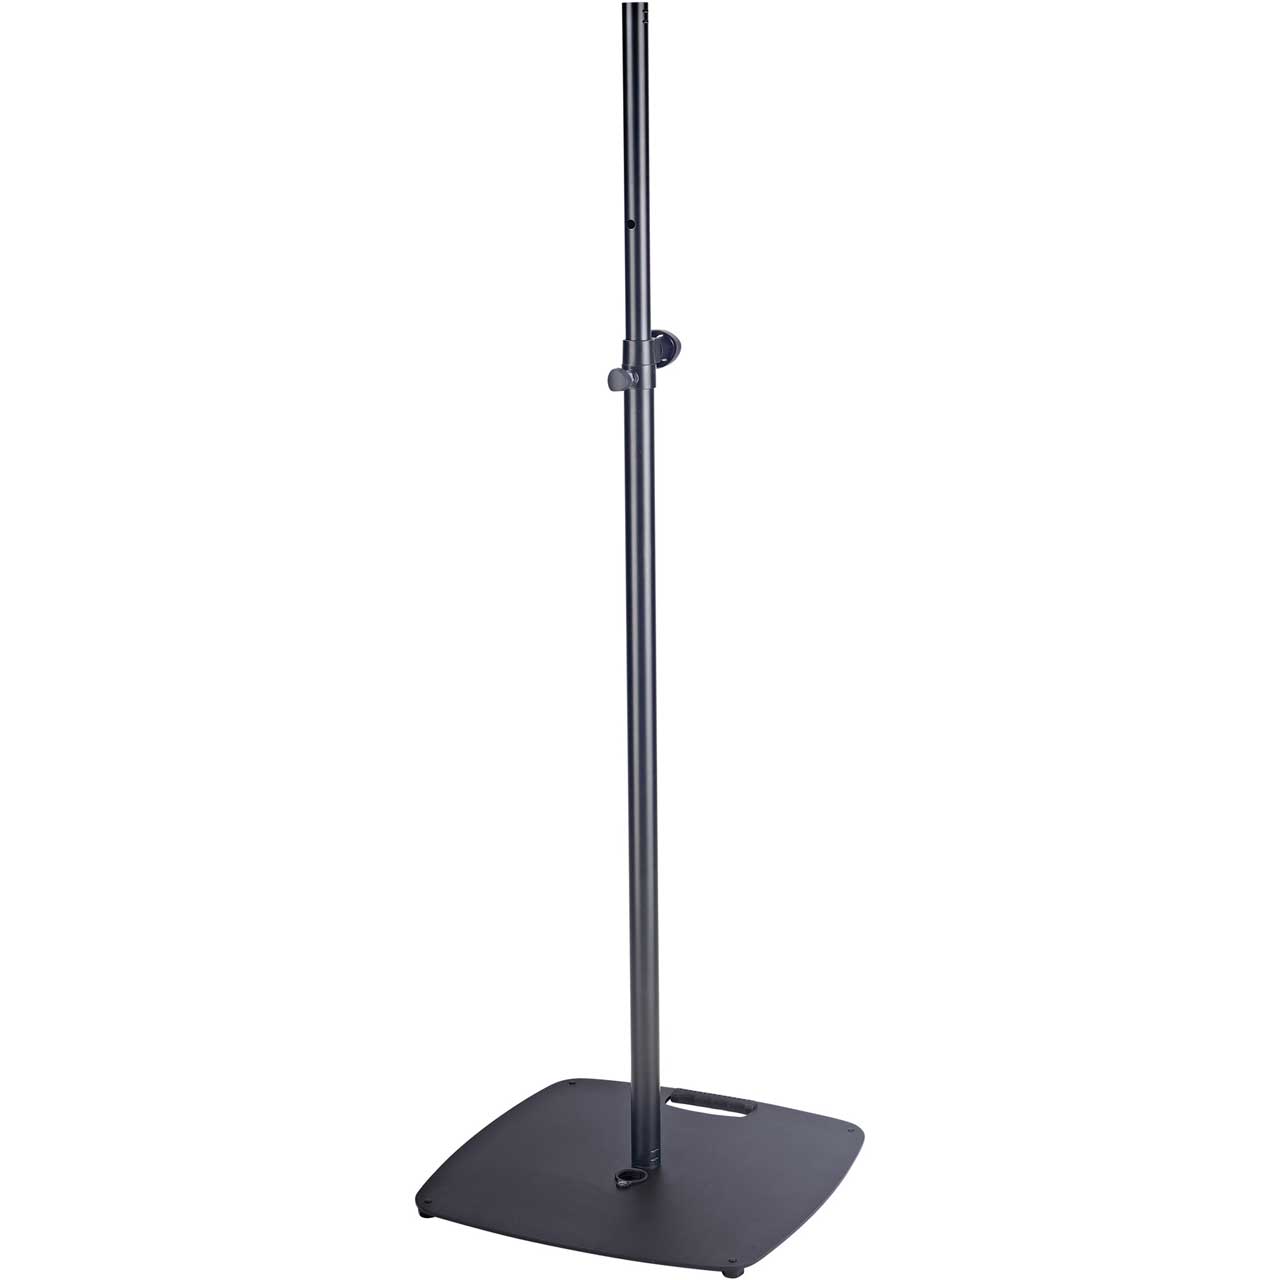 K&M 24624-000-55 Lighting Stand with Heavy Steel Base - 55-94 Inch Height - Black 24624-000-55